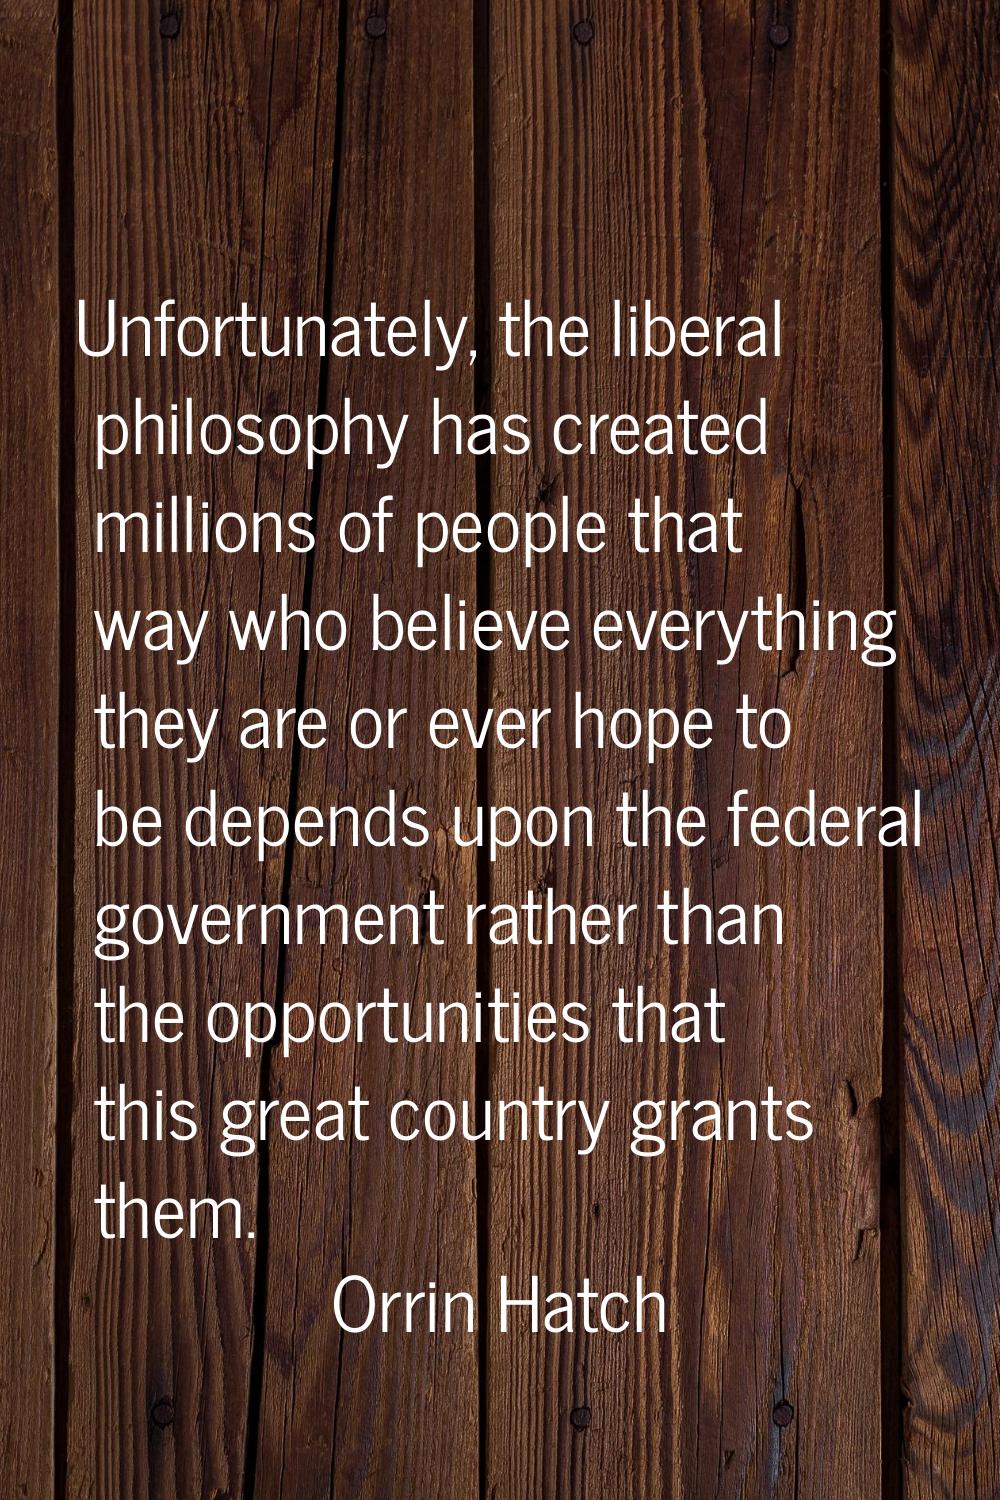 Unfortunately, the liberal philosophy has created millions of people that way who believe everythin